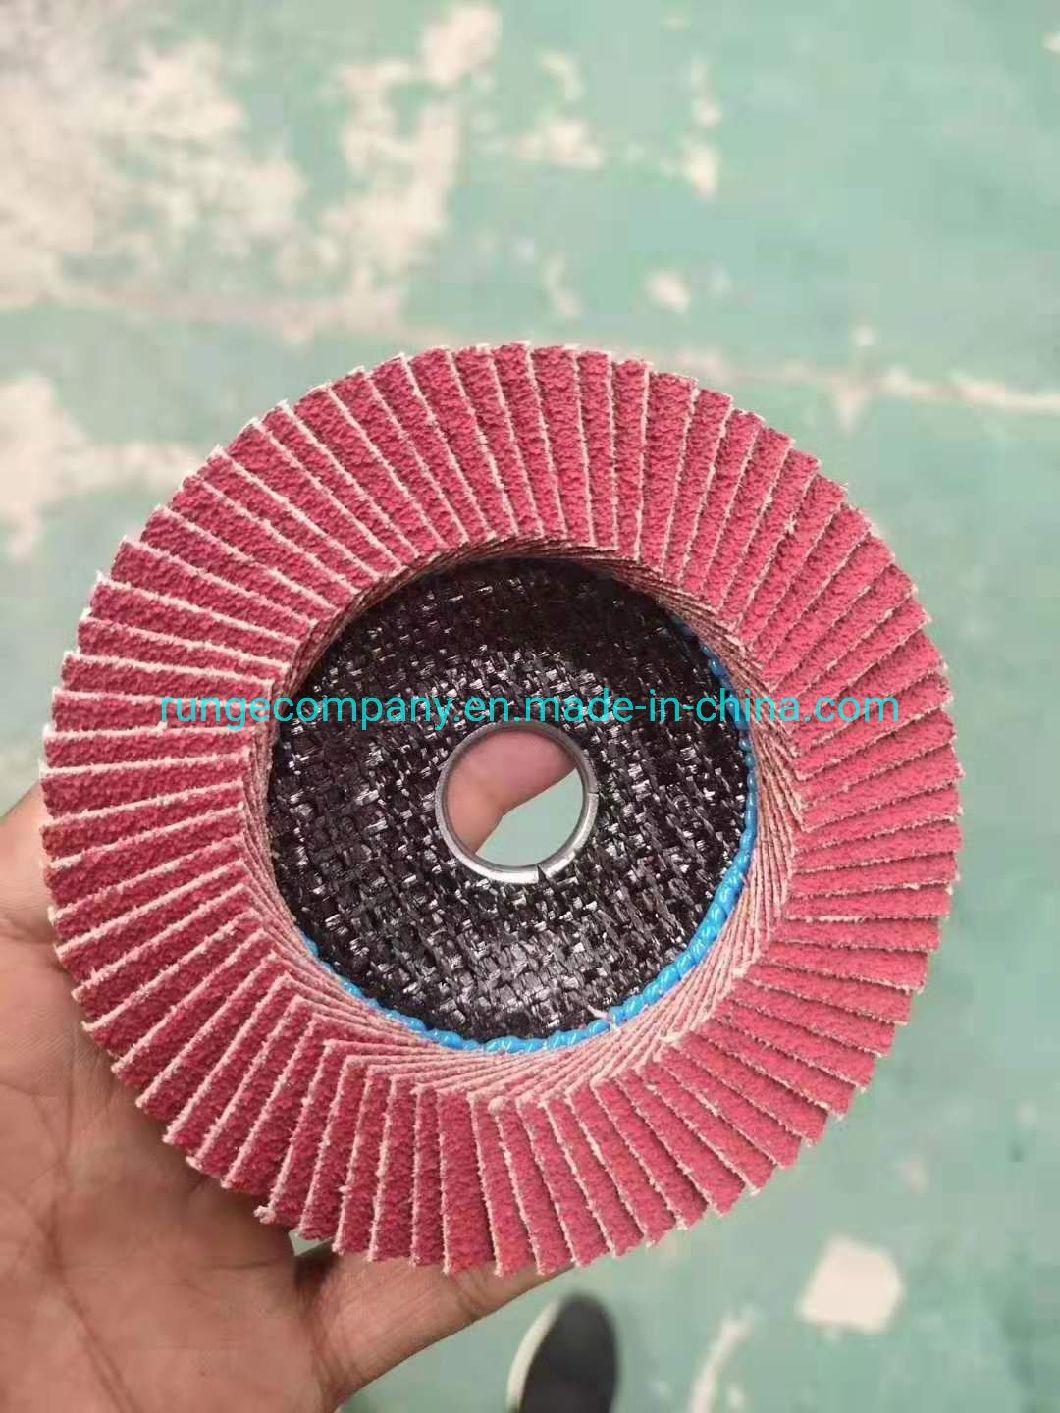 4inch Abrasive Flap Discs Type 27 for Various Famous Angle Grinder Power Tools